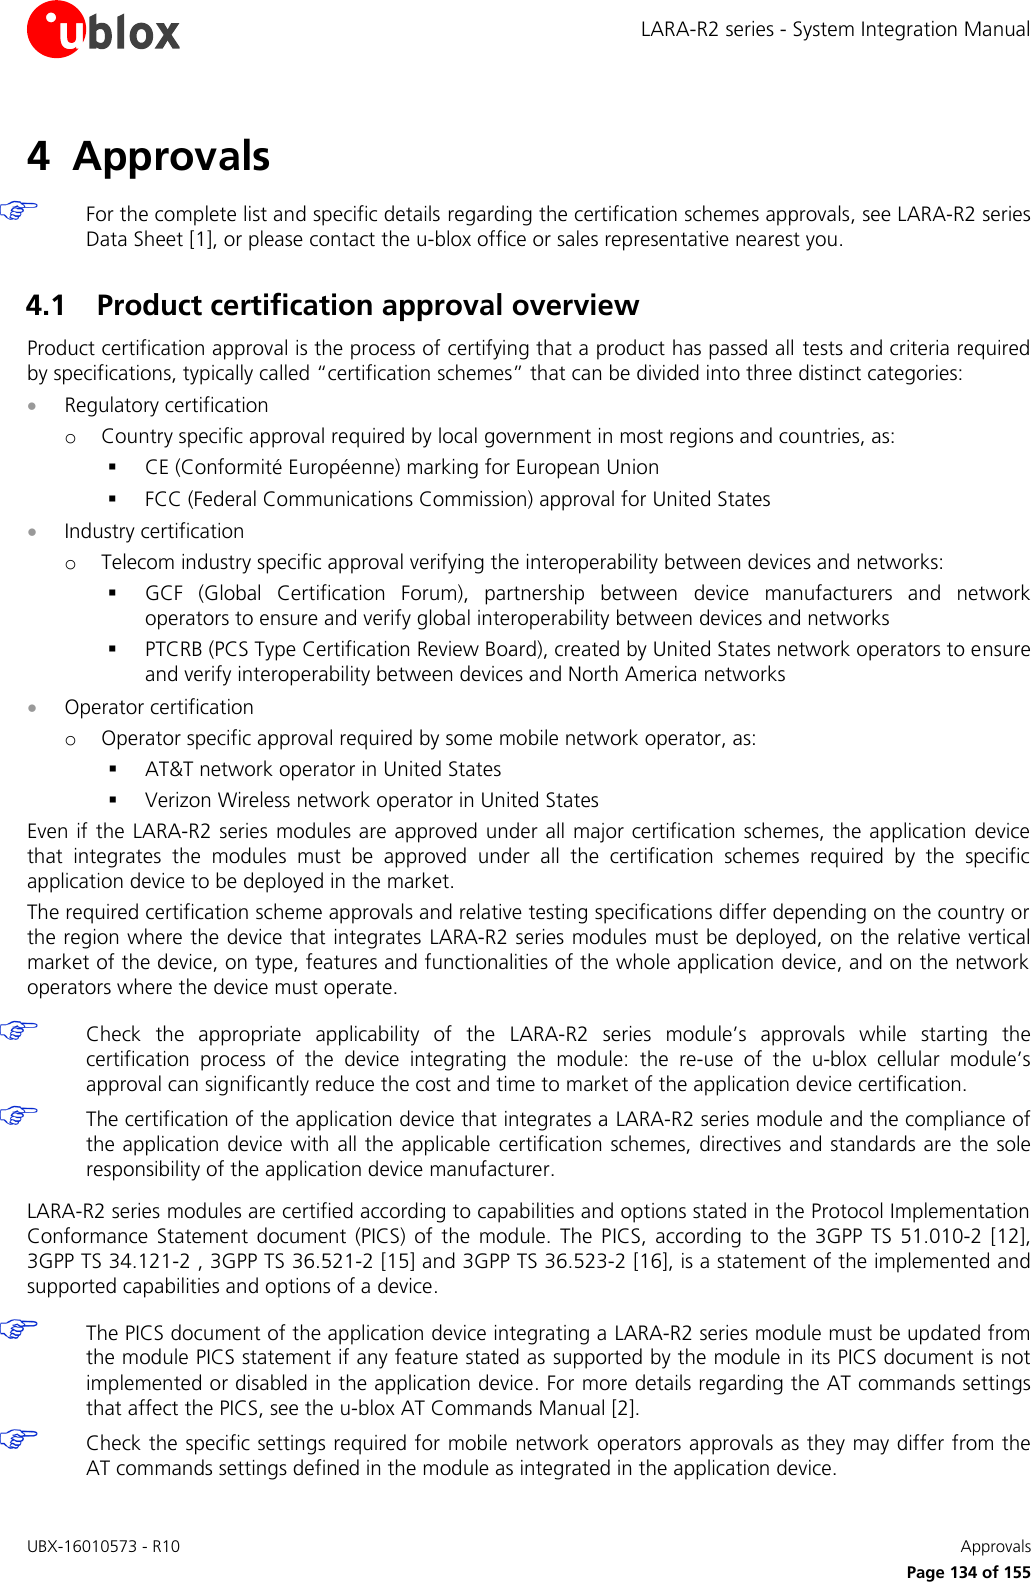 LARA-R2 series - System Integration Manual UBX-16010573 - R10    Approvals     Page 134 of 155 4 Approvals   For the complete list and specific details regarding the certification schemes approvals, see LARA-R2 series Data Sheet [1], or please contact the u-blox office or sales representative nearest you.  4.1 Product certification approval overview Product certification approval is the process of certifying that a product has passed all tests and criteria required by specifications, typically called “certification schemes” that can be divided into three distinct categories:  Regulatory certification o Country specific approval required by local government in most regions and countries, as:  CE (Conformité Européenne) marking for European Union  FCC (Federal Communications Commission) approval for United States  Industry certification o Telecom industry specific approval verifying the interoperability between devices and networks:  GCF  (Global  Certification  Forum),  partnership  between  device  manufacturers  and  network operators to ensure and verify global interoperability between devices and networks  PTCRB (PCS Type Certification Review Board), created by United States network operators to ensure and verify interoperability between devices and North America networks  Operator certification o Operator specific approval required by some mobile network operator, as:  AT&amp;T network operator in United States  Verizon Wireless network operator in United States Even if the LARA-R2  series modules are approved  under all major certification  schemes, the application  device that  integrates  the  modules  must  be  approved  under  all  the  certification  schemes  required  by  the  specific application device to be deployed in the market. The required certification scheme approvals and relative testing specifications differ depending on the country or the region where the device that integrates  LARA-R2 series modules must be deployed, on the relative vertical market of the device, on type, features and functionalities of the whole application device, and on the network operators where the device must operate.   Check  the  appropriate  applicability  of  the  LARA-R2  series  module’s  approvals  while  starting  the certification  process  of  the  device  integrating  the  module:  the  re-use  of  the  u-blox  cellular  module’s approval can significantly reduce the cost and time to market of the application device certification.  The certification of the application device that integrates a LARA-R2 series module and the compliance of the application device with all the applicable  certification schemes, directives and standards are  the sole responsibility of the application device manufacturer.  LARA-R2 series modules are certified according to capabilities and options stated in the Protocol Implementation Conformance  Statement  document  (PICS)  of  the  module.  The  PICS,  according  to  the  3GPP  TS  51.010-2  [12], 3GPP TS 34.121-2 , 3GPP TS 36.521-2 [15] and 3GPP TS 36.523-2 [16], is a statement of the implemented and supported capabilities and options of a device.   The PICS document of the application device integrating a LARA-R2 series module must be updated from the module PICS statement if any feature stated as supported by the module in its PICS document is not implemented or disabled in the application device. For more details regarding the AT commands settings that affect the PICS, see the u-blox AT Commands Manual [2].  Check the specific settings required for mobile network operators approvals as they may differ from the AT commands settings defined in the module as integrated in the application device.  